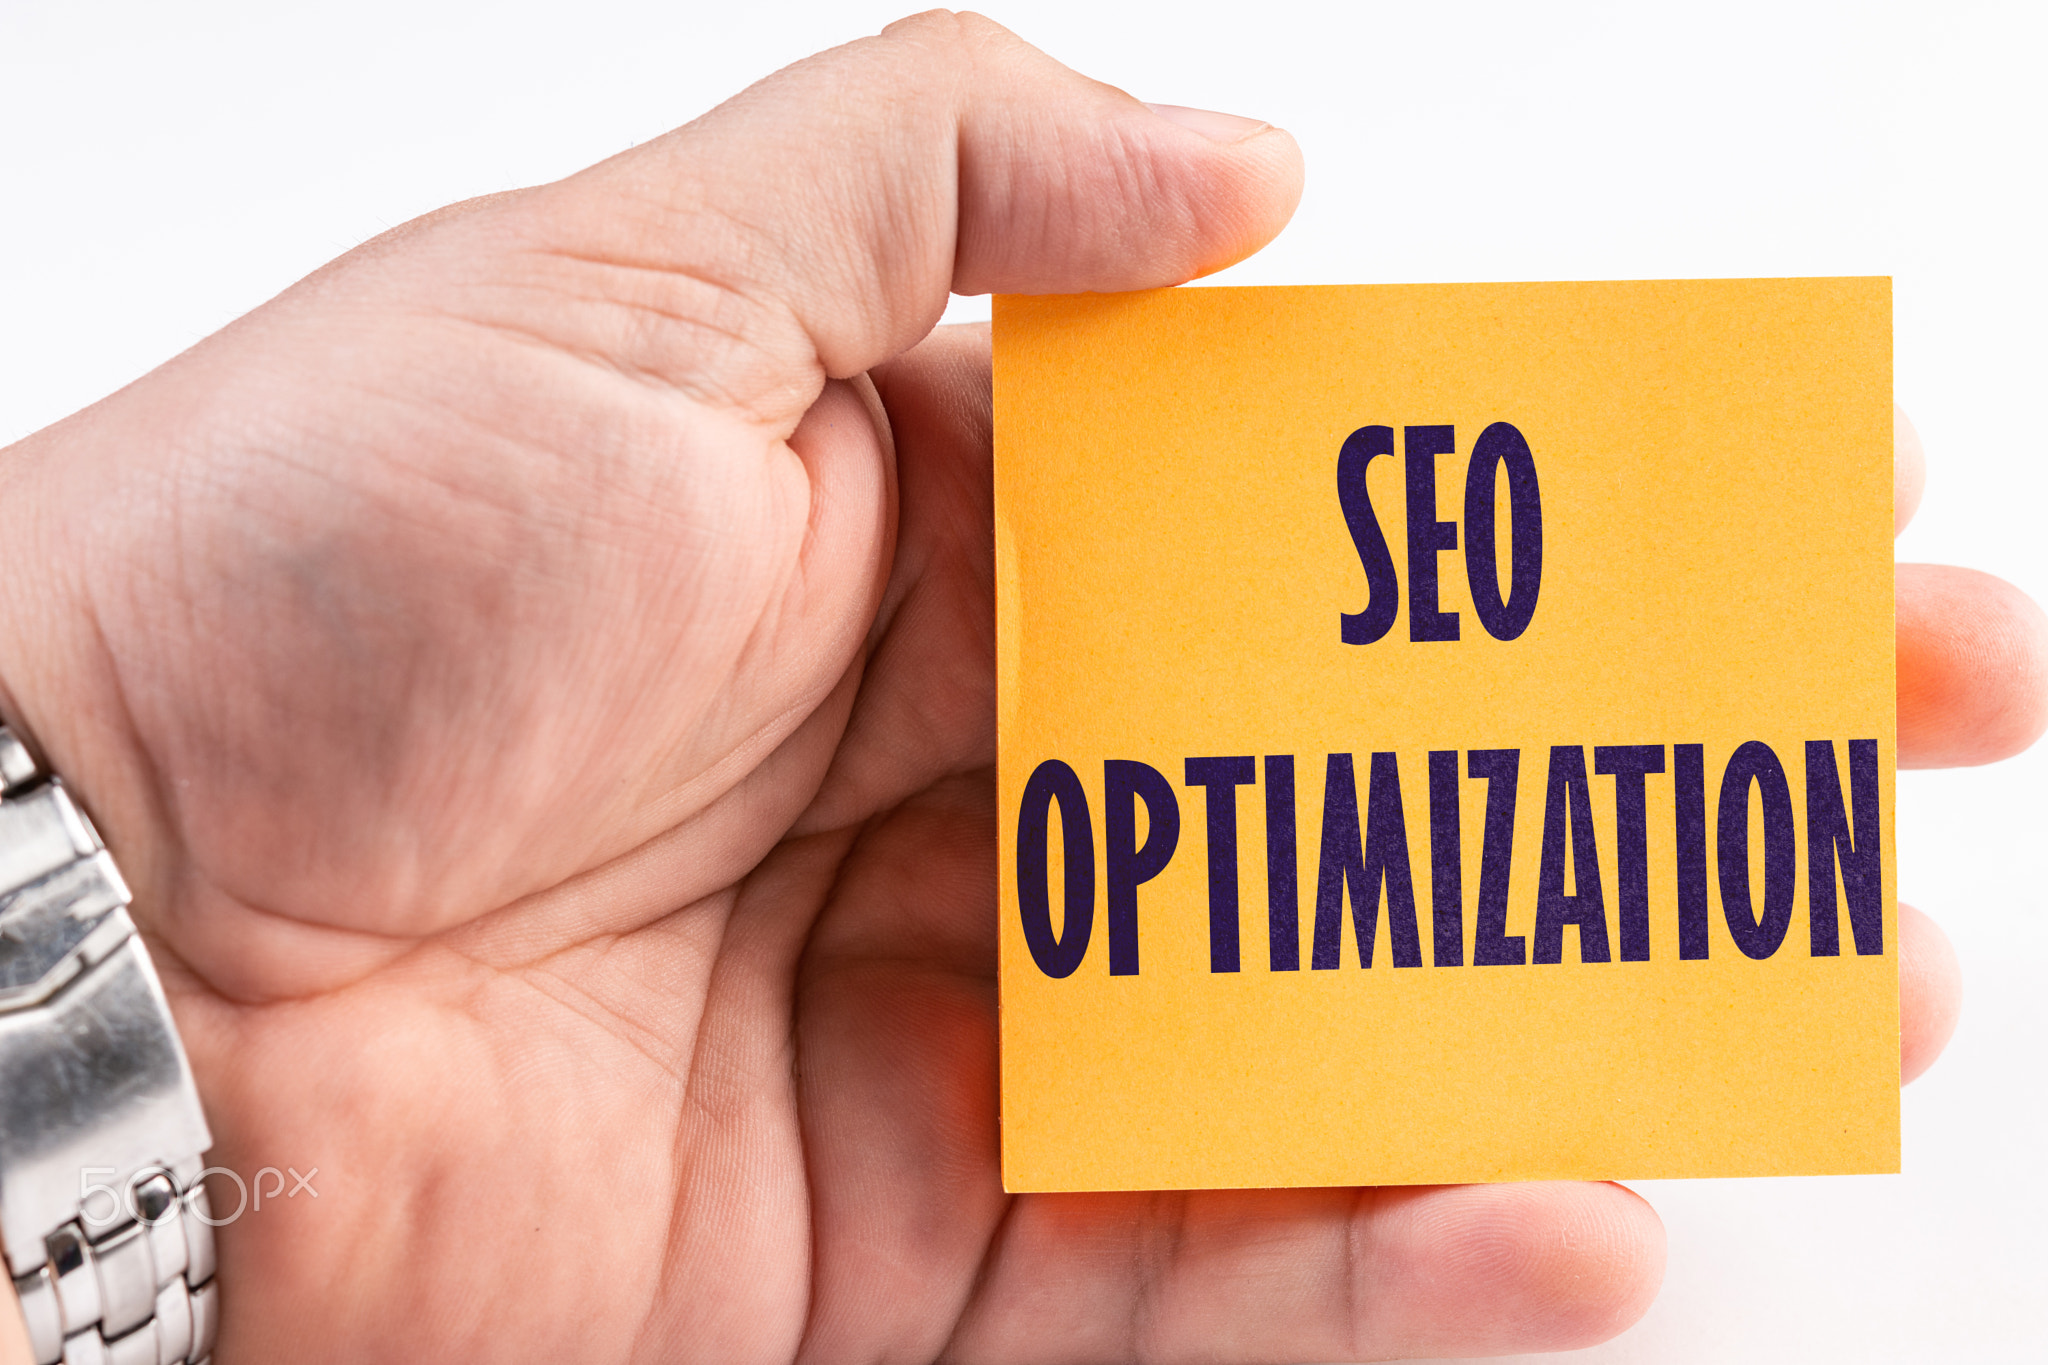 SEO Optimization Text Concept On The Sticky Notes Paper In The Hand